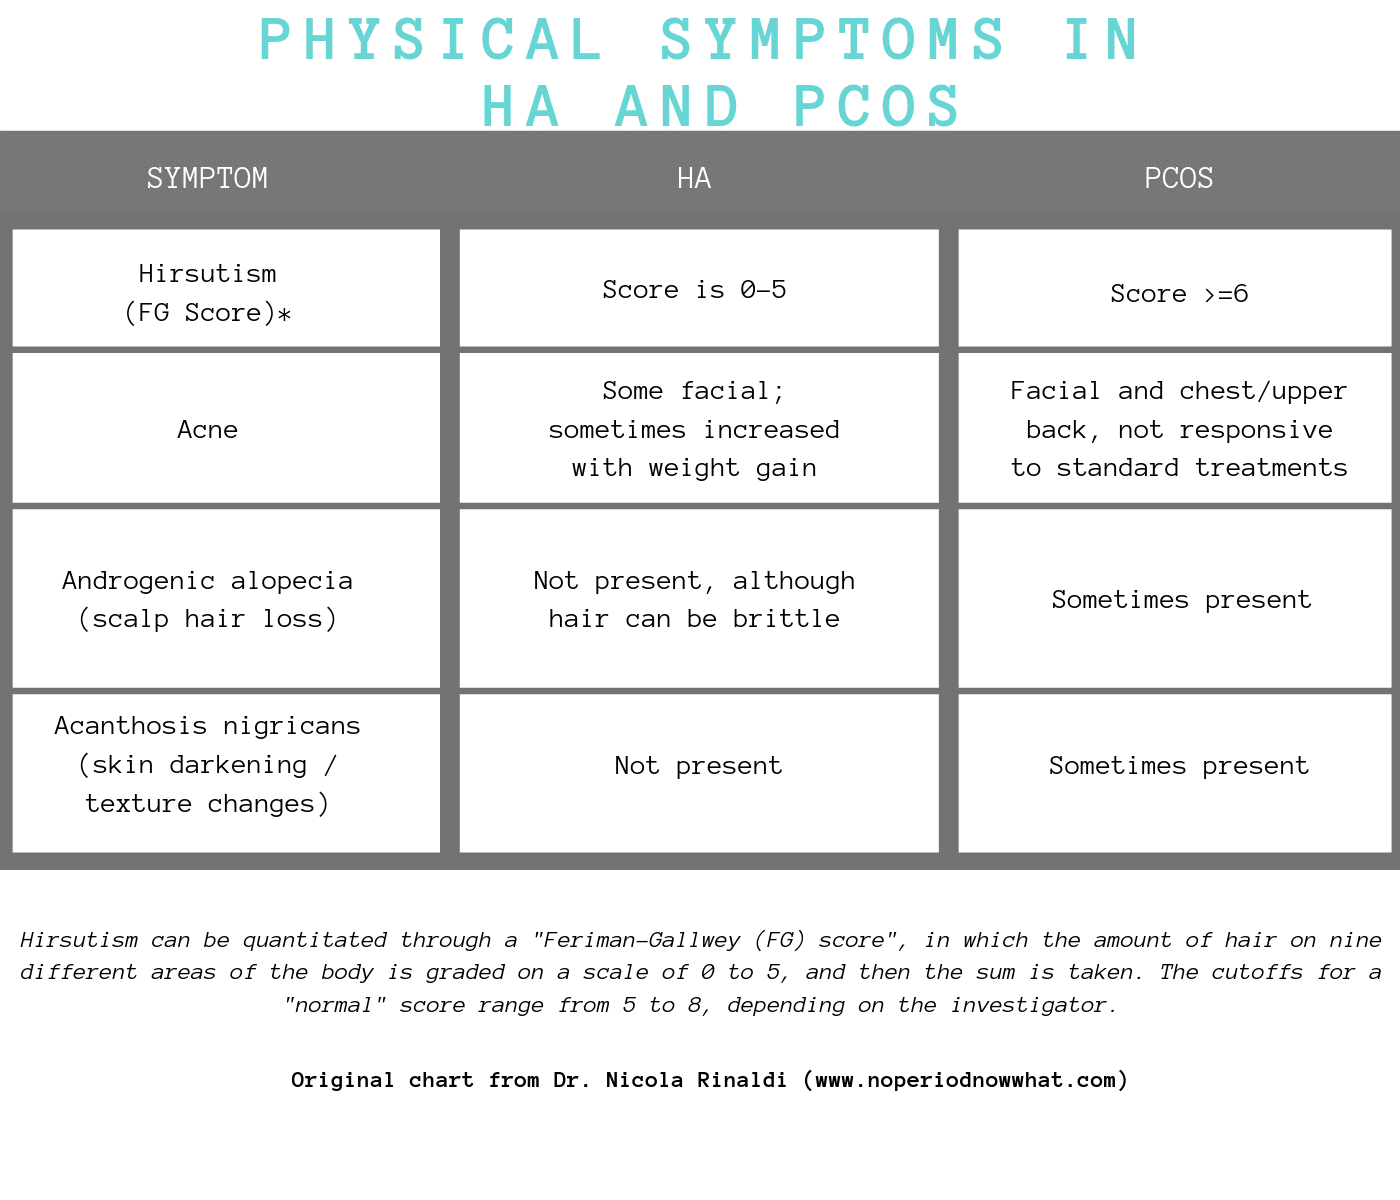 Chart with HA and PCOS information